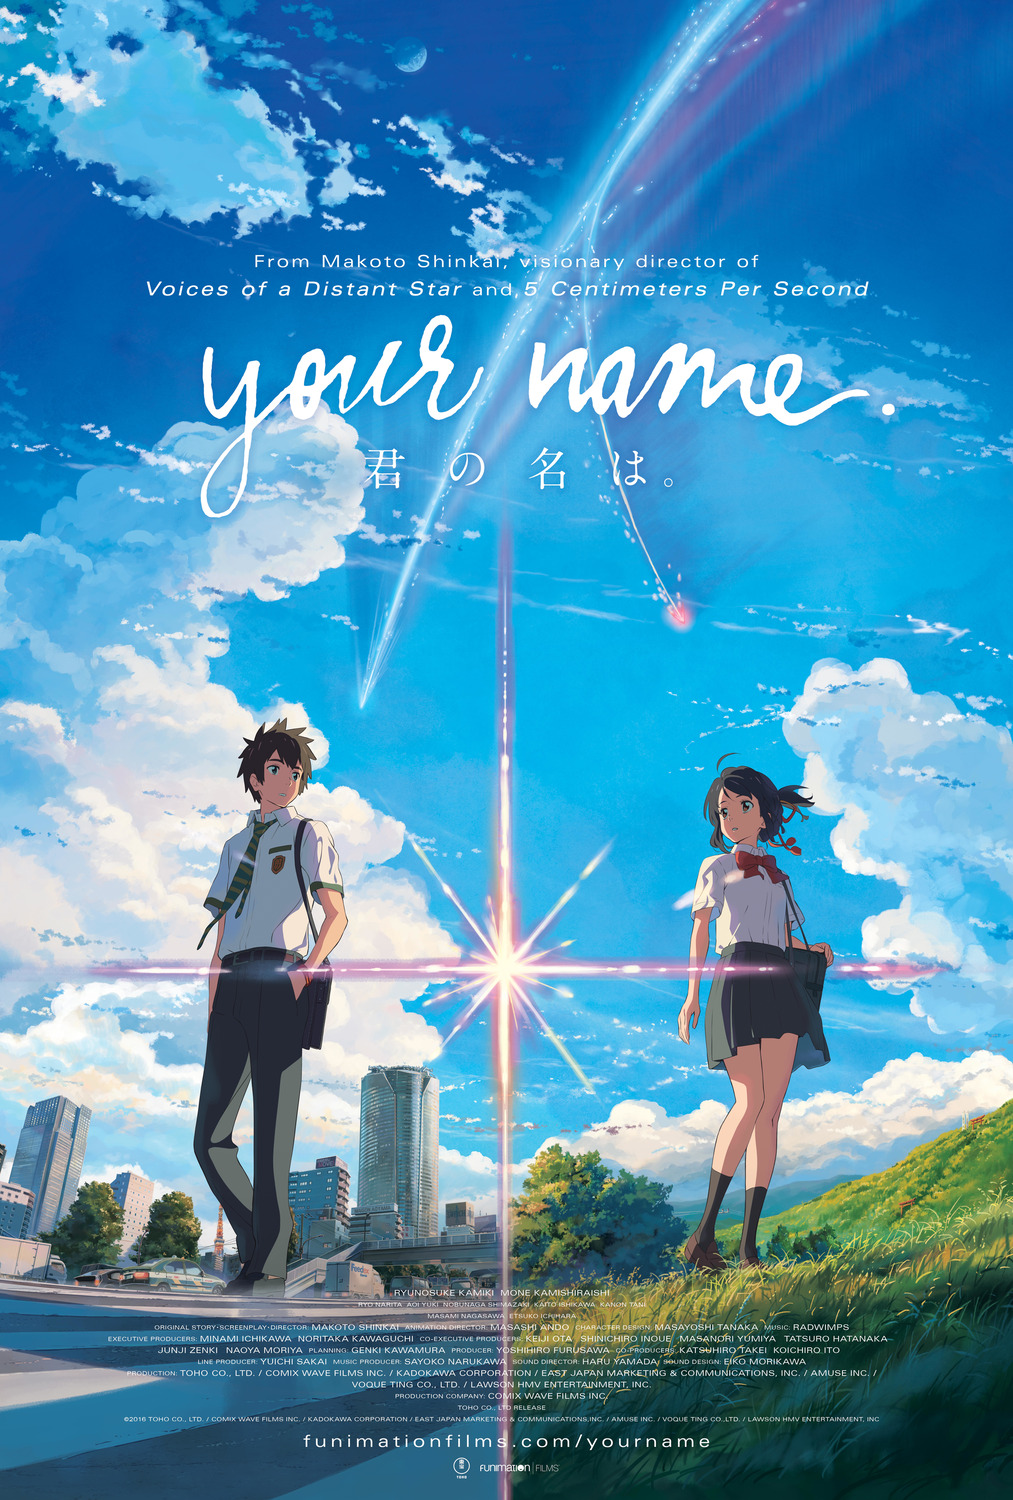 Extra Large Movie Poster Image for Kimi no na wa. 